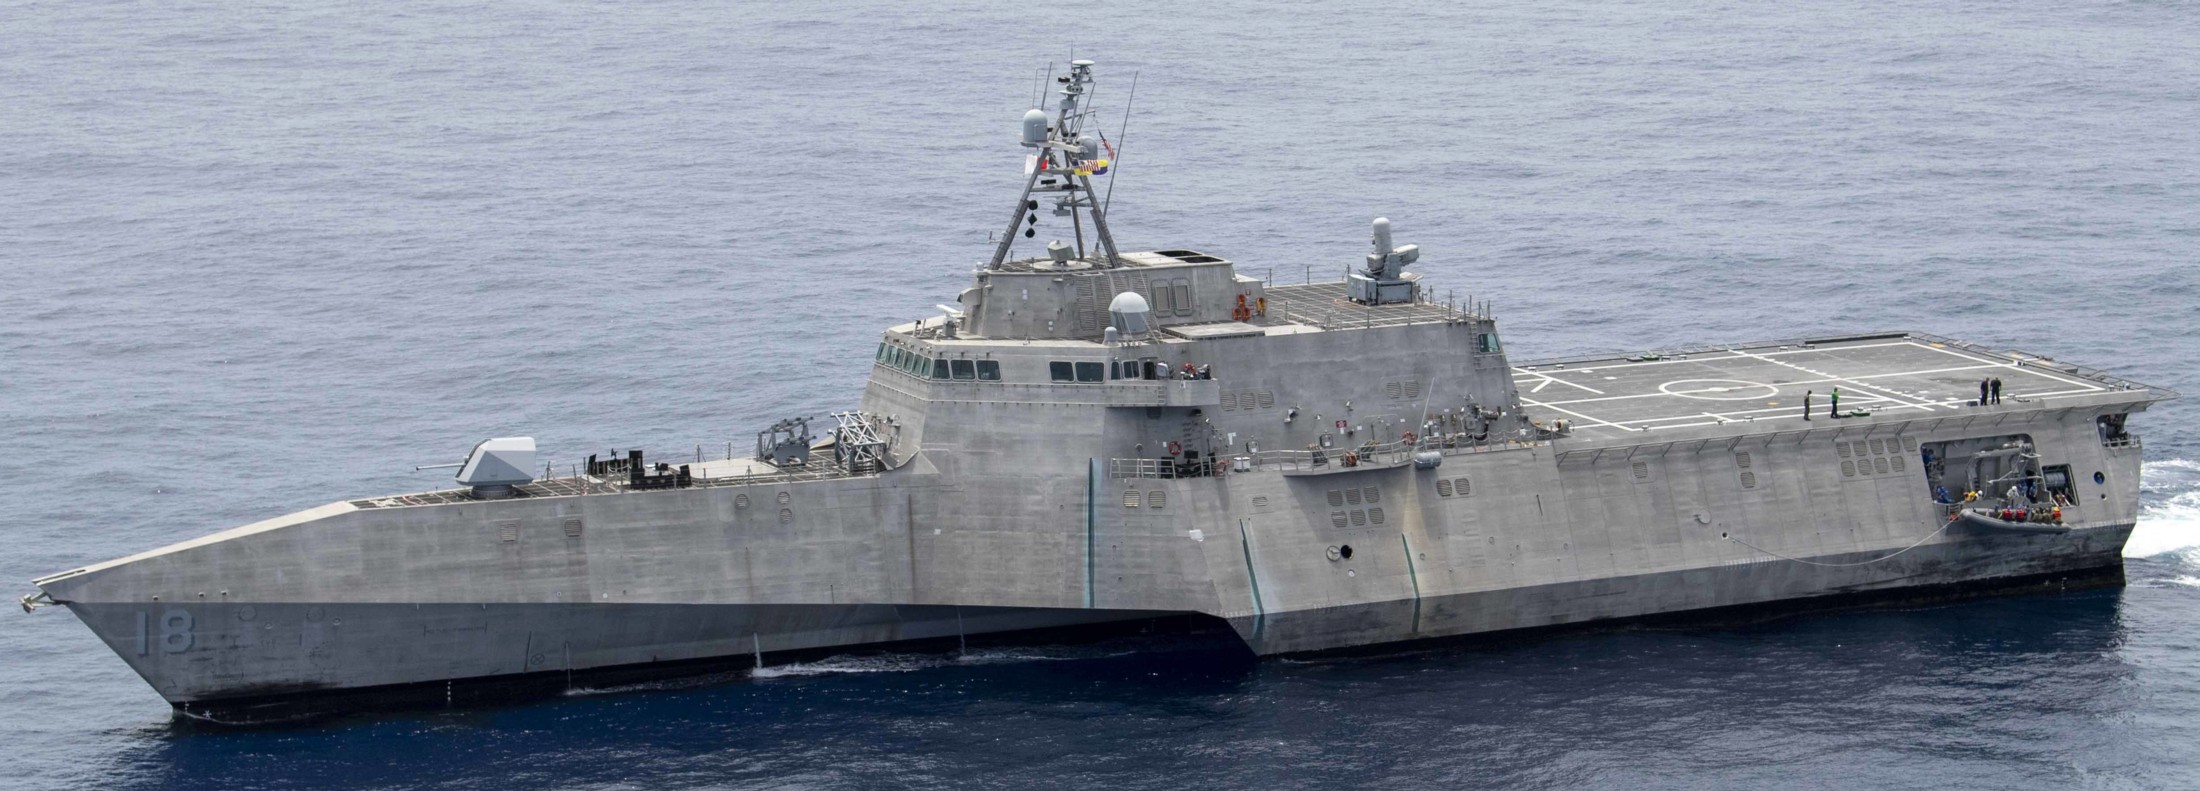 lcs-18 uss charleston independence class littoral combat ship us navy 25